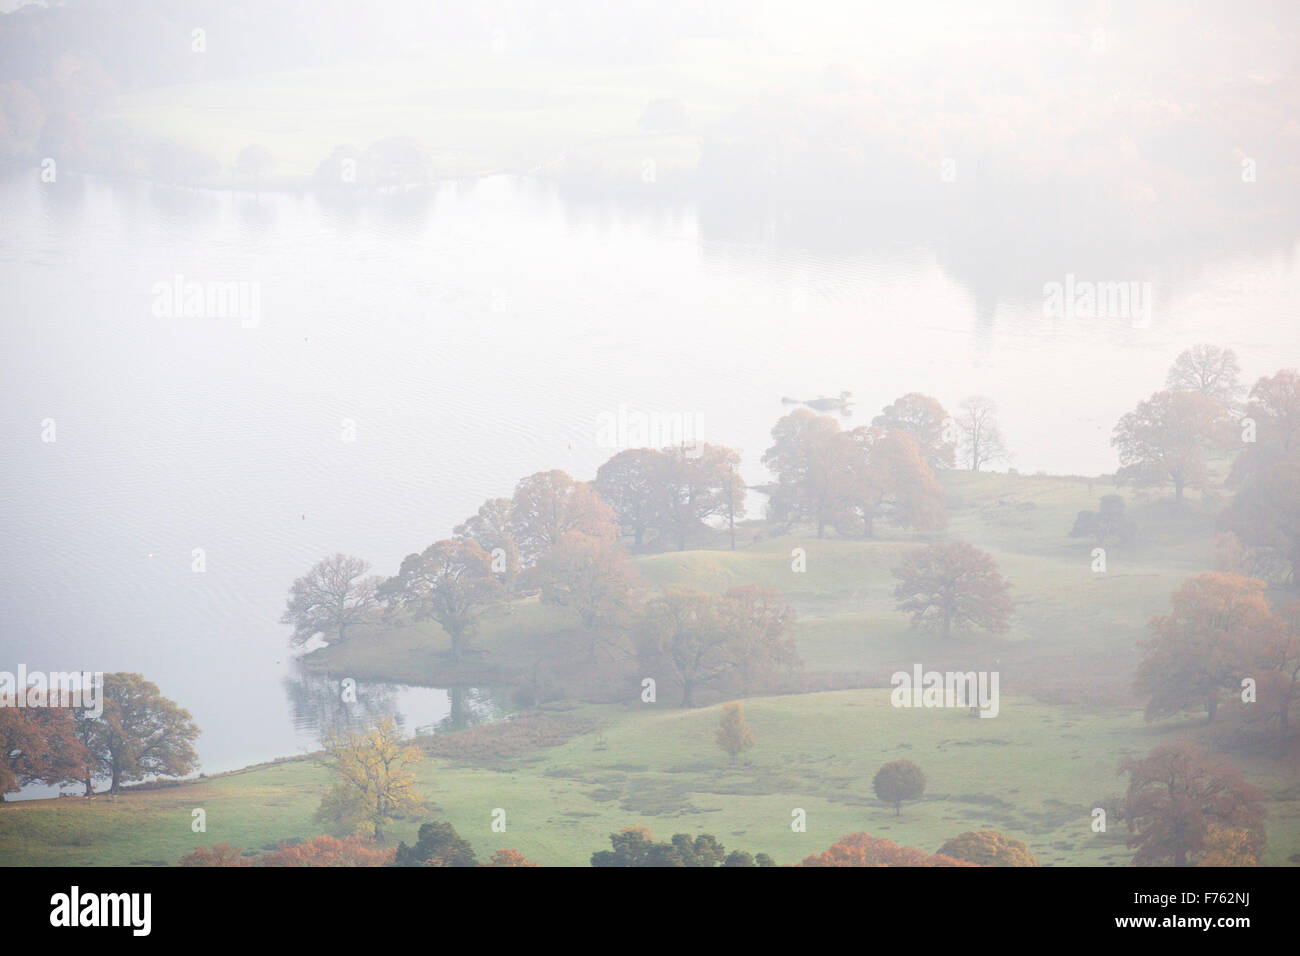 Looking down on Lake Windermere in the Lake District in poor visability due to thin fog. Stock Photo